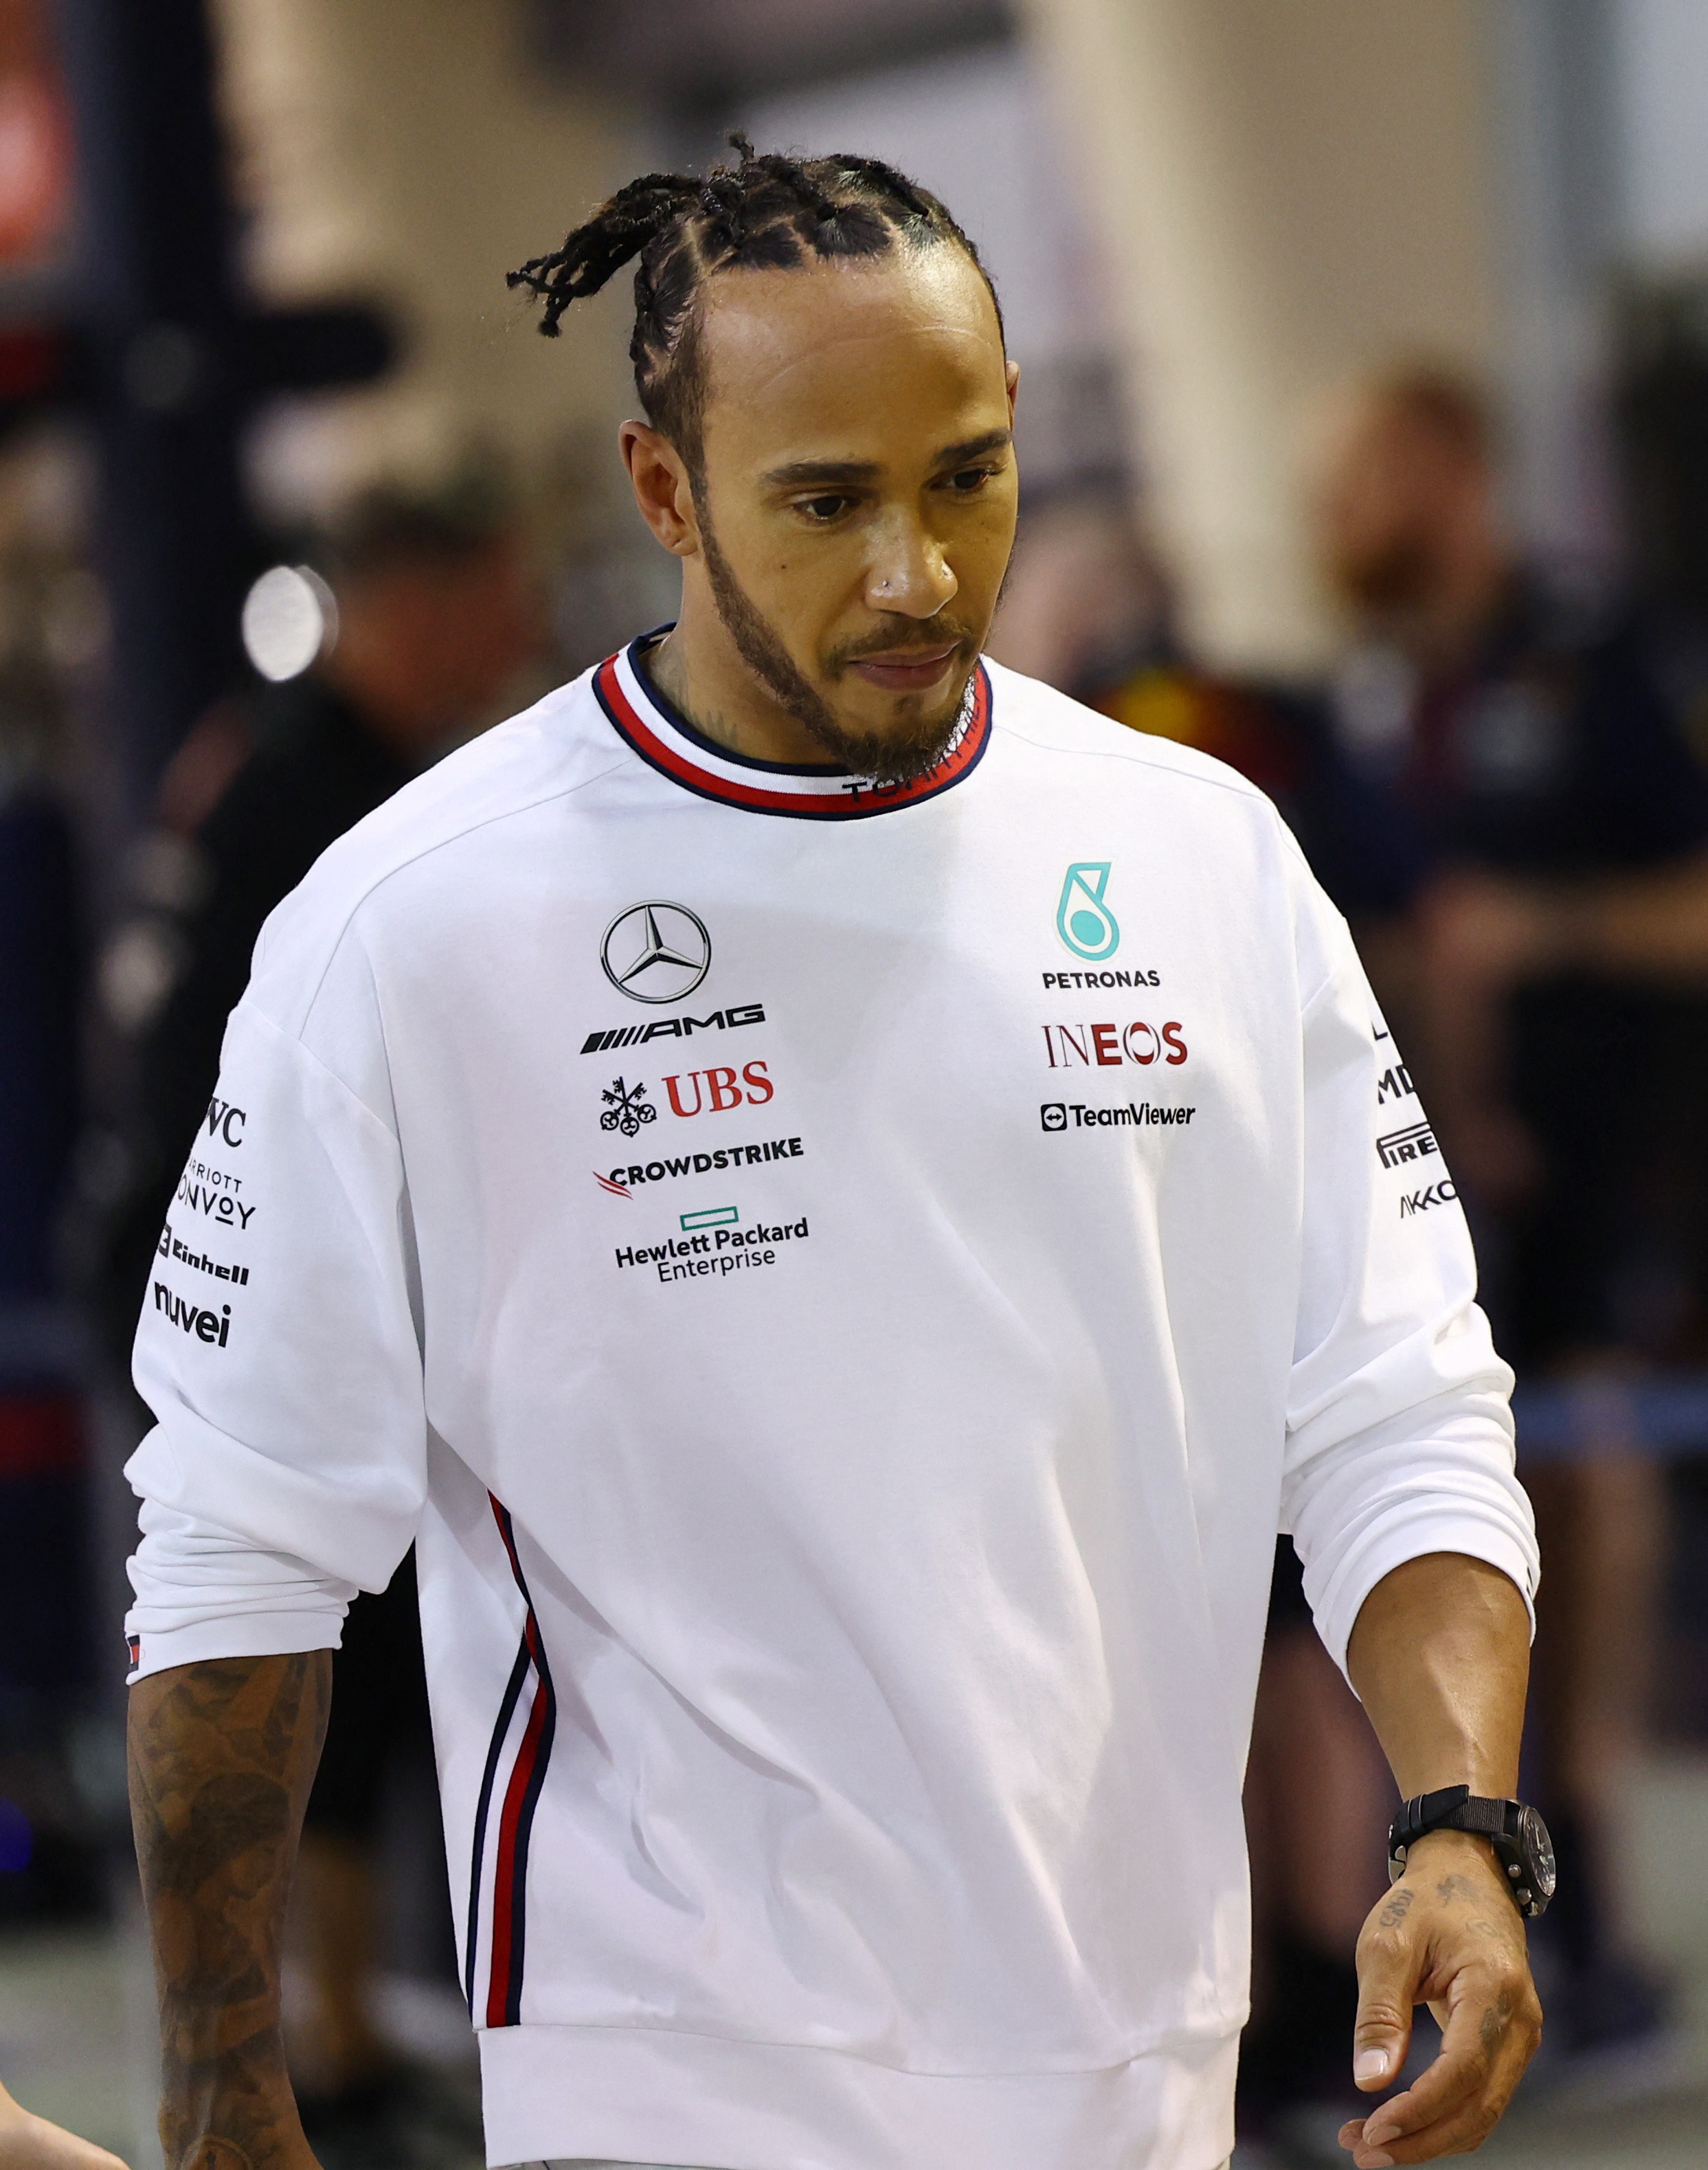 , Lewis Hamilton arrives for Bahrain GP in bizarre all-brown outfit with Mercedes star already facing nightmare season